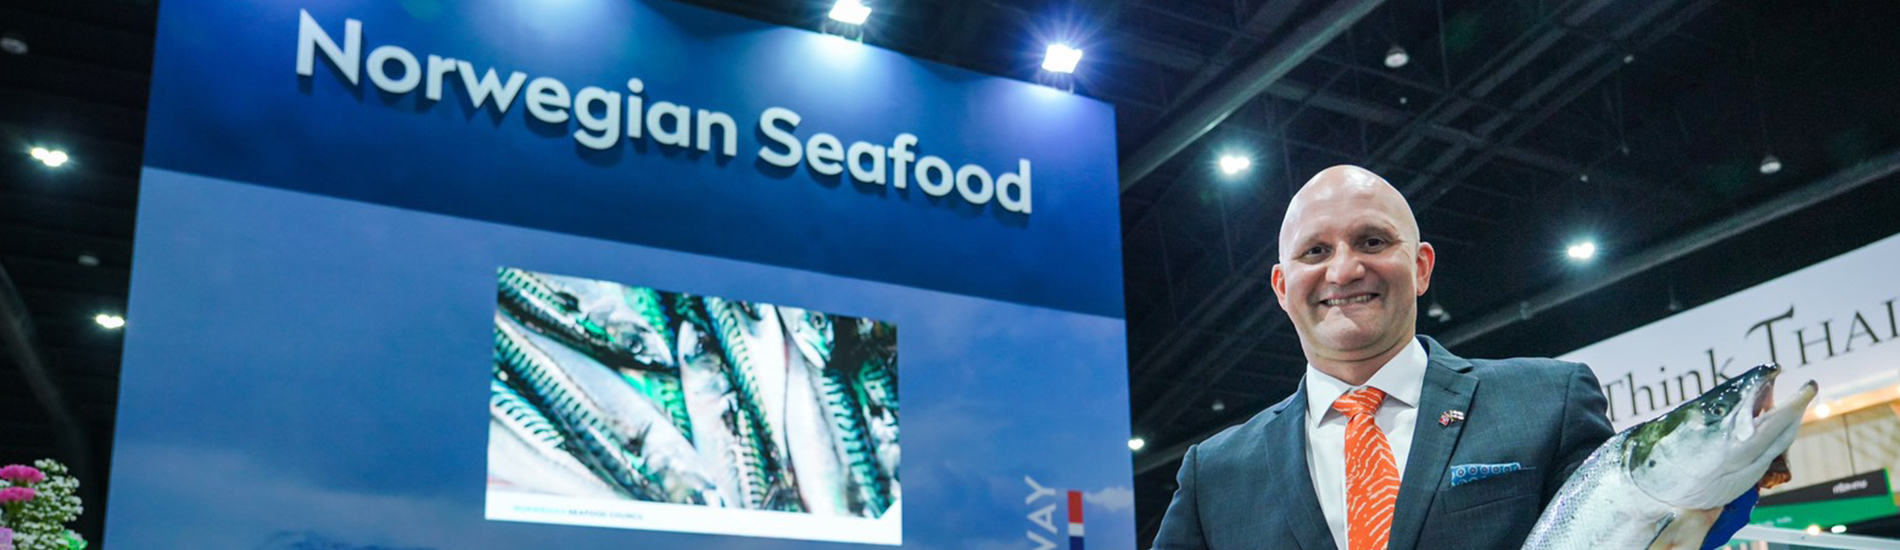 Norwegian Seafood Council’s Booth at ThaiFex-Anuga Asia 2020